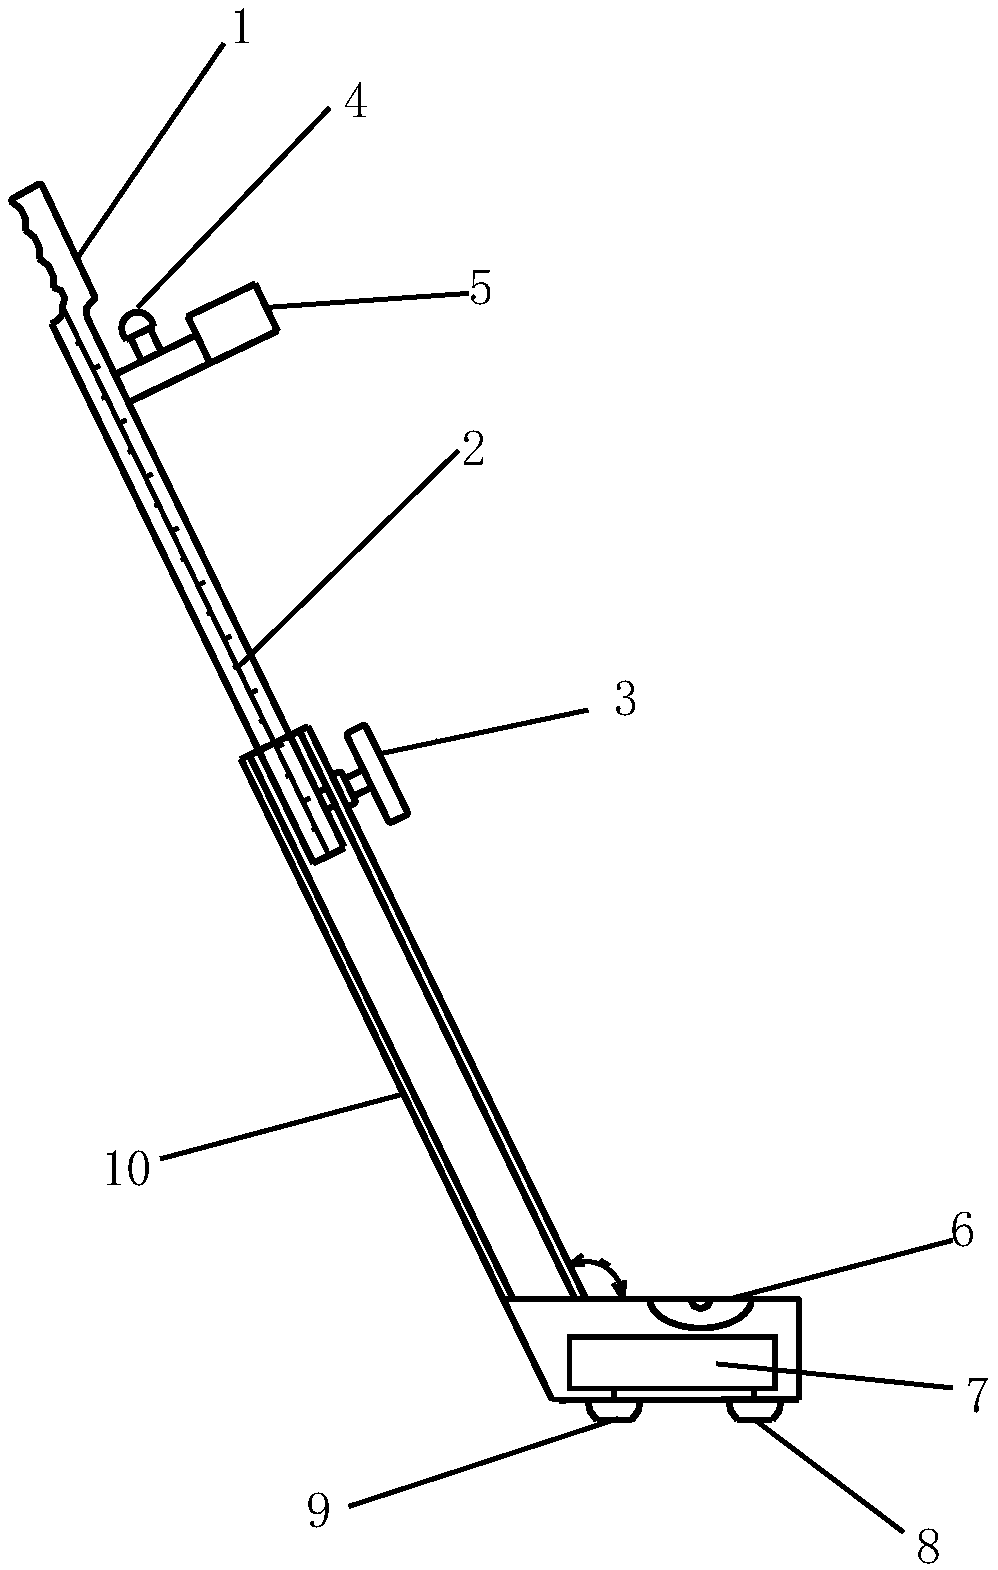 Water depth measurement device and method